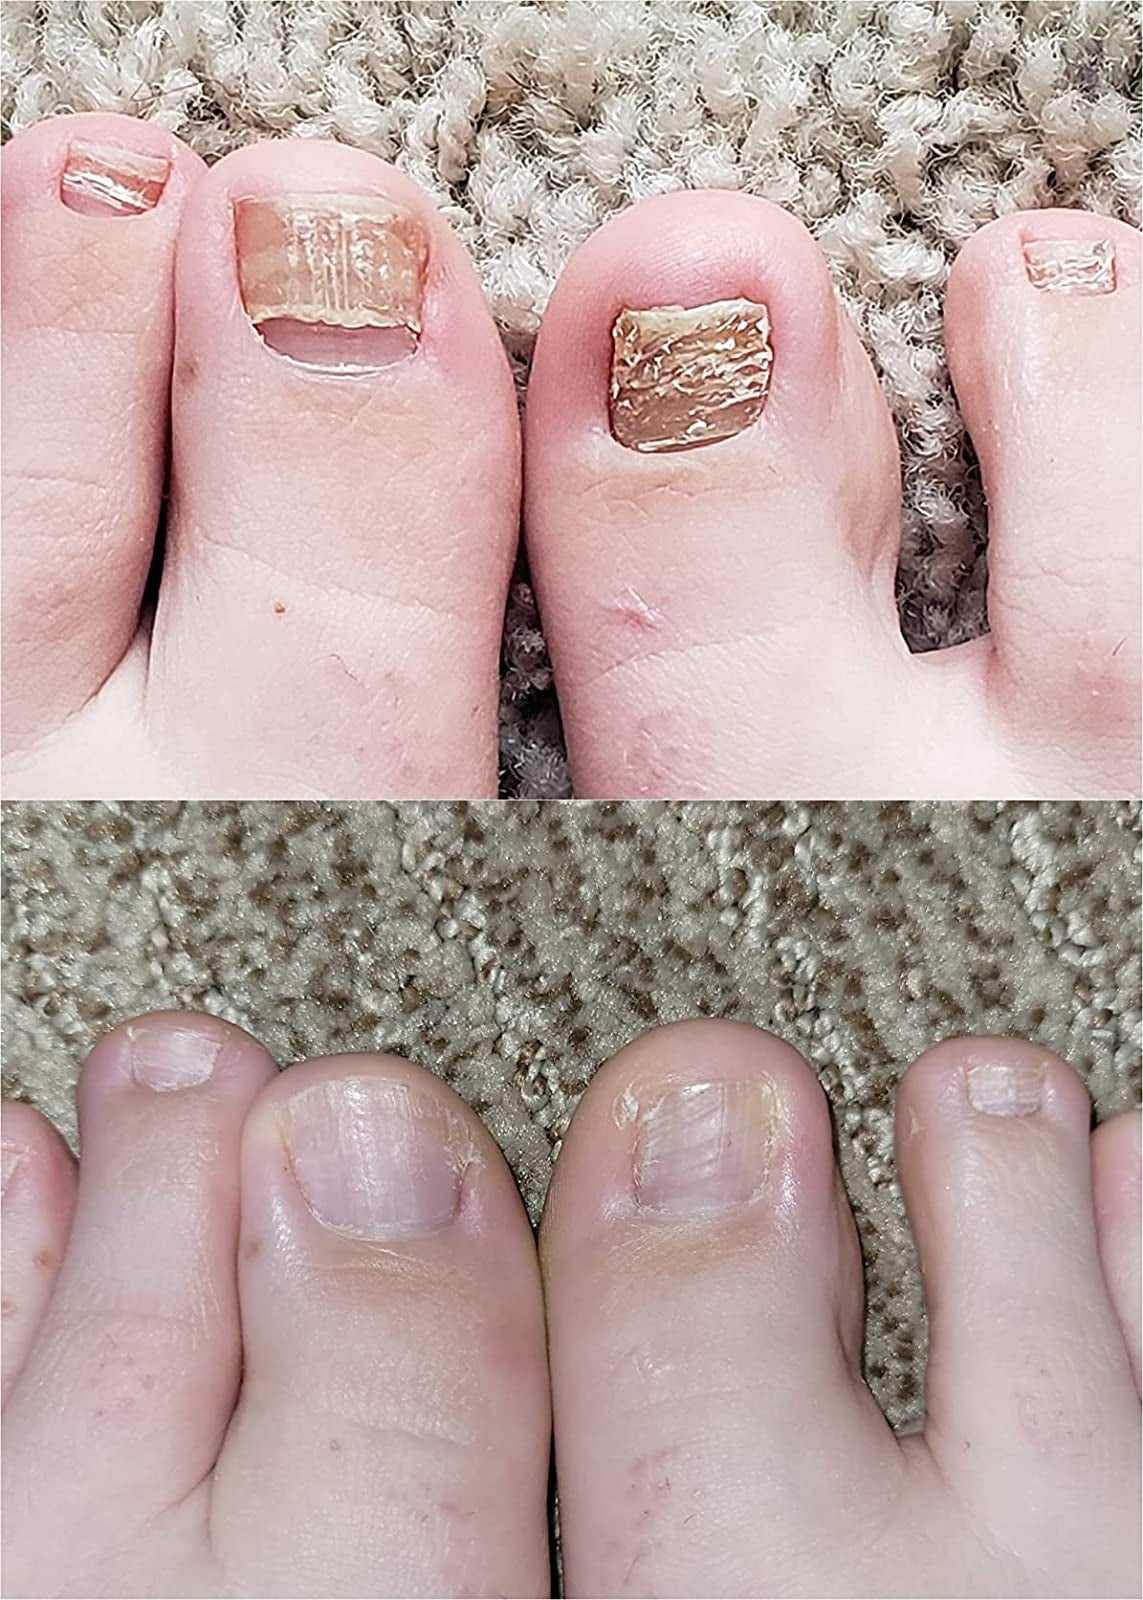 sooner than and after photos of a reviewer's toenails with fungus then being eradicated